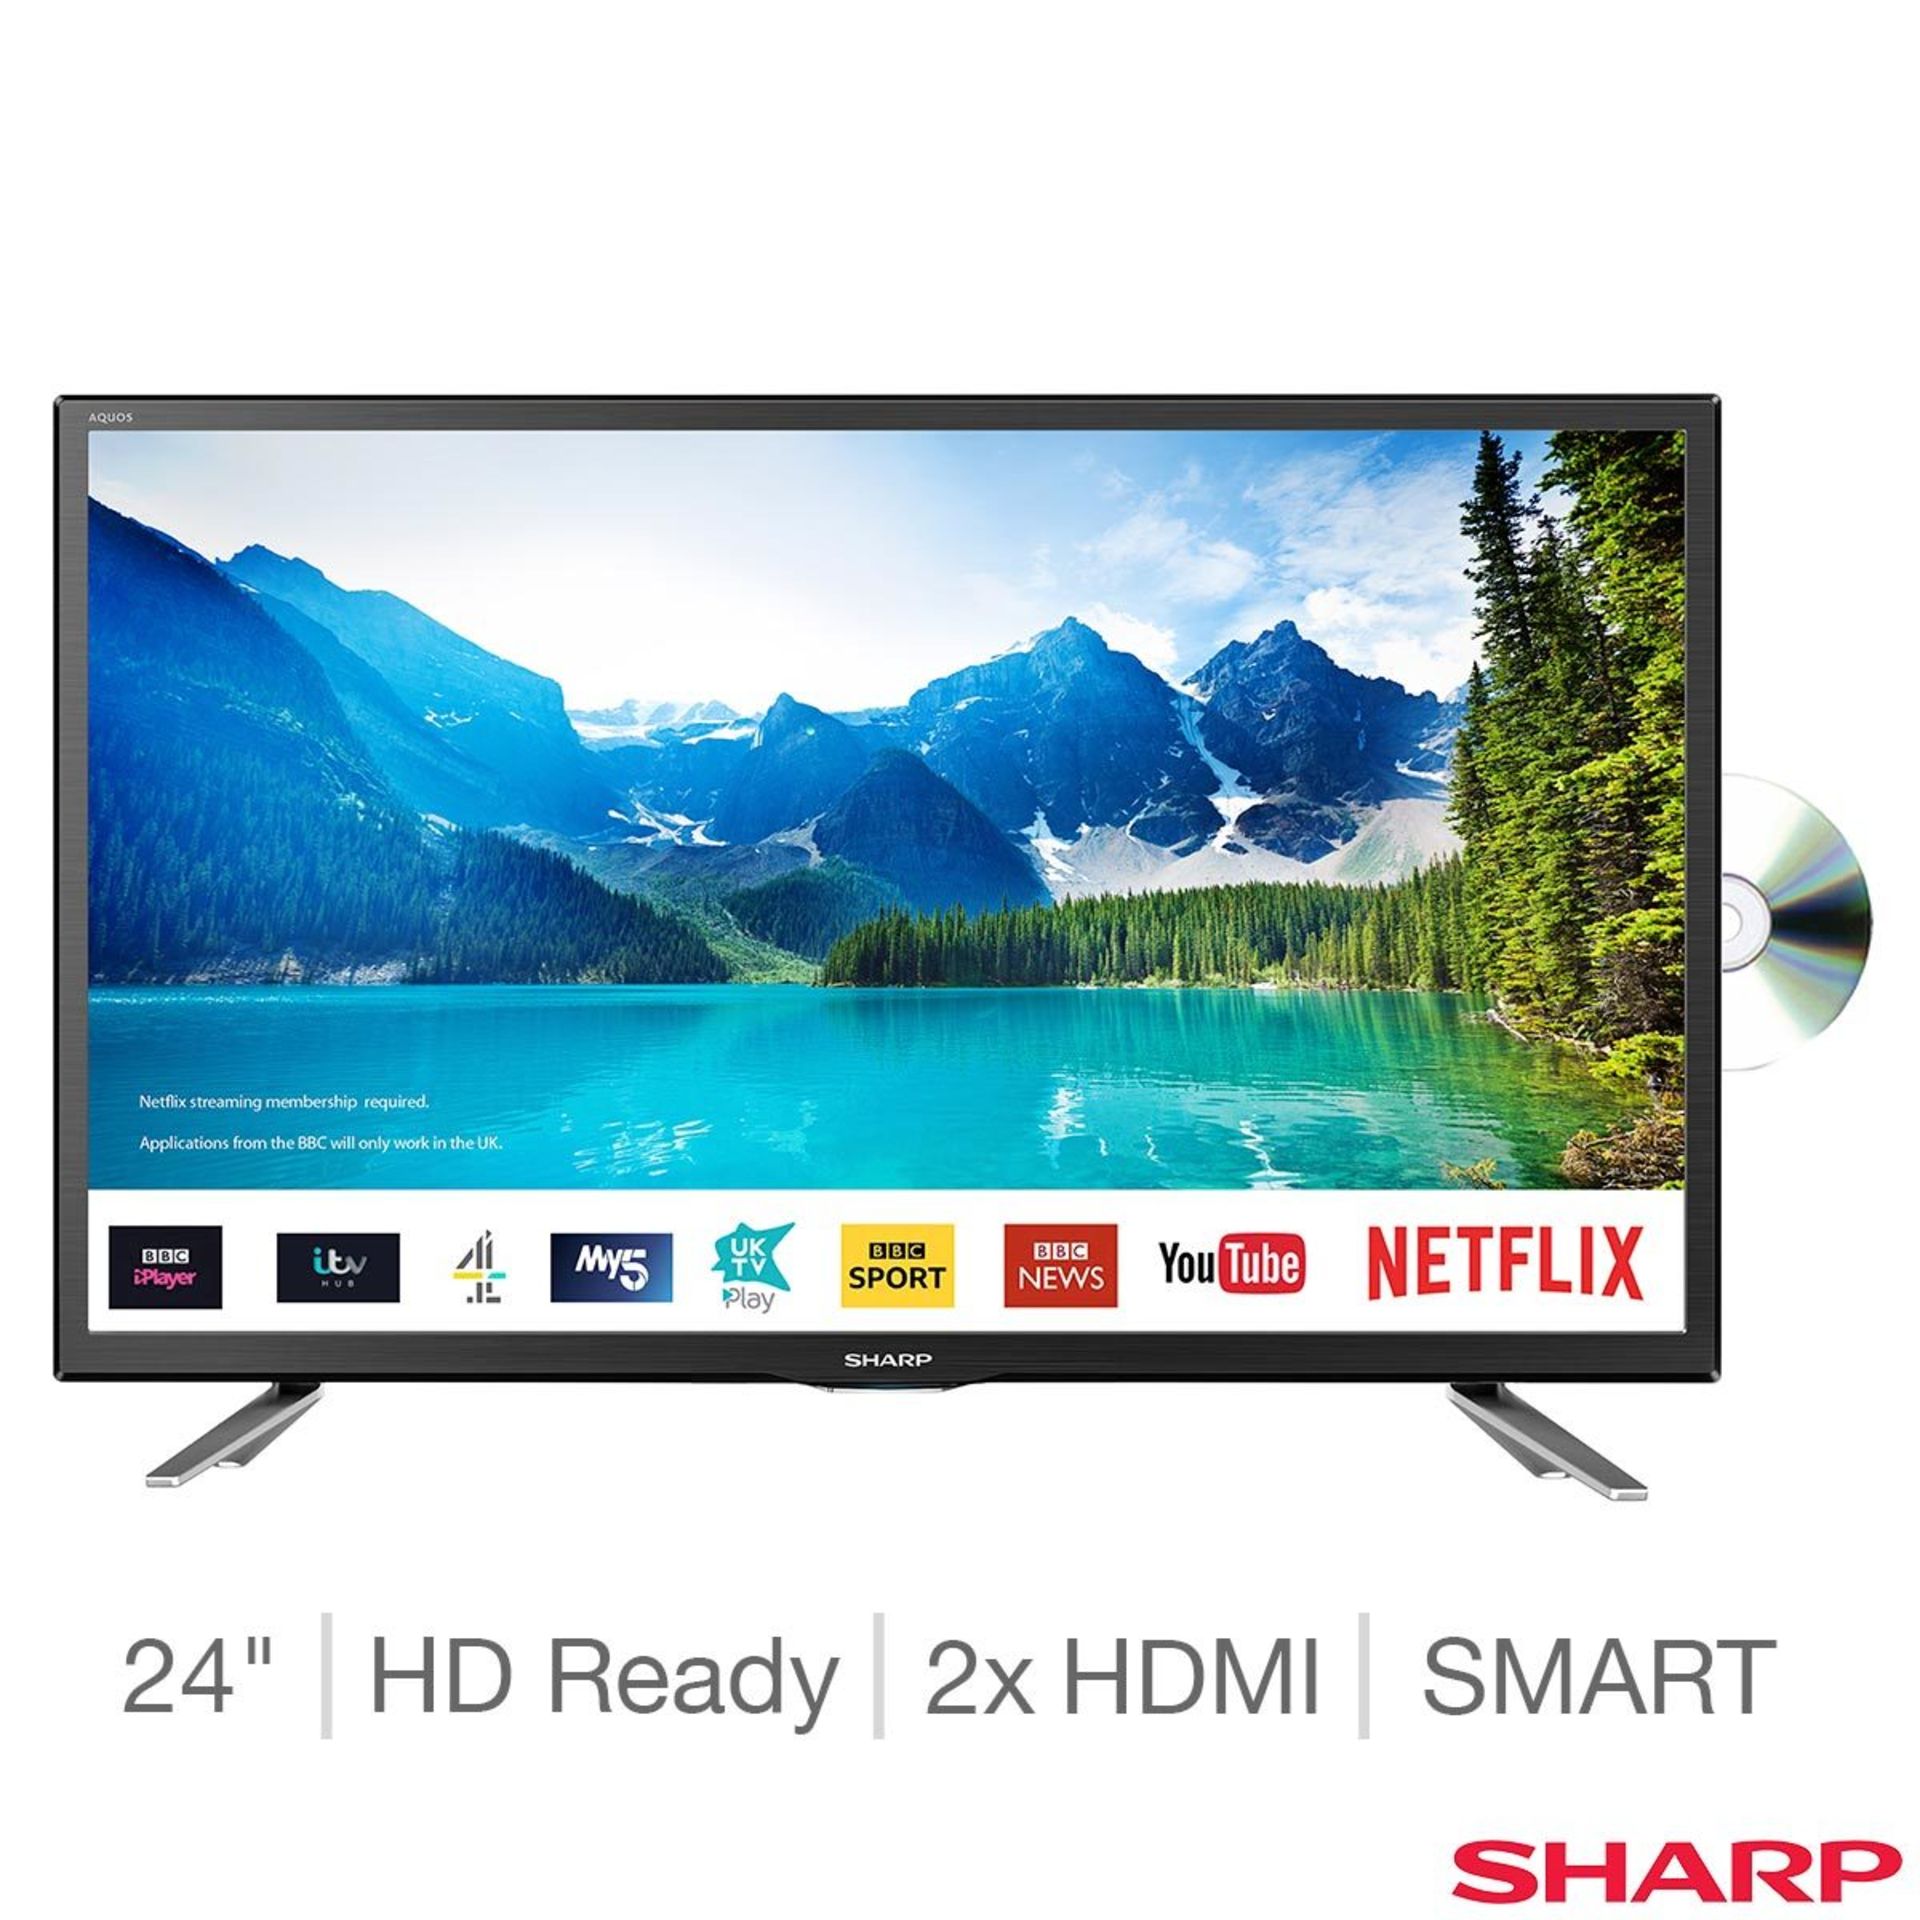 (11) 1 x Grade B - Sharp LC-24DHG6131K 24" 720p HD Ready LED Smart TV with Built-in DVD